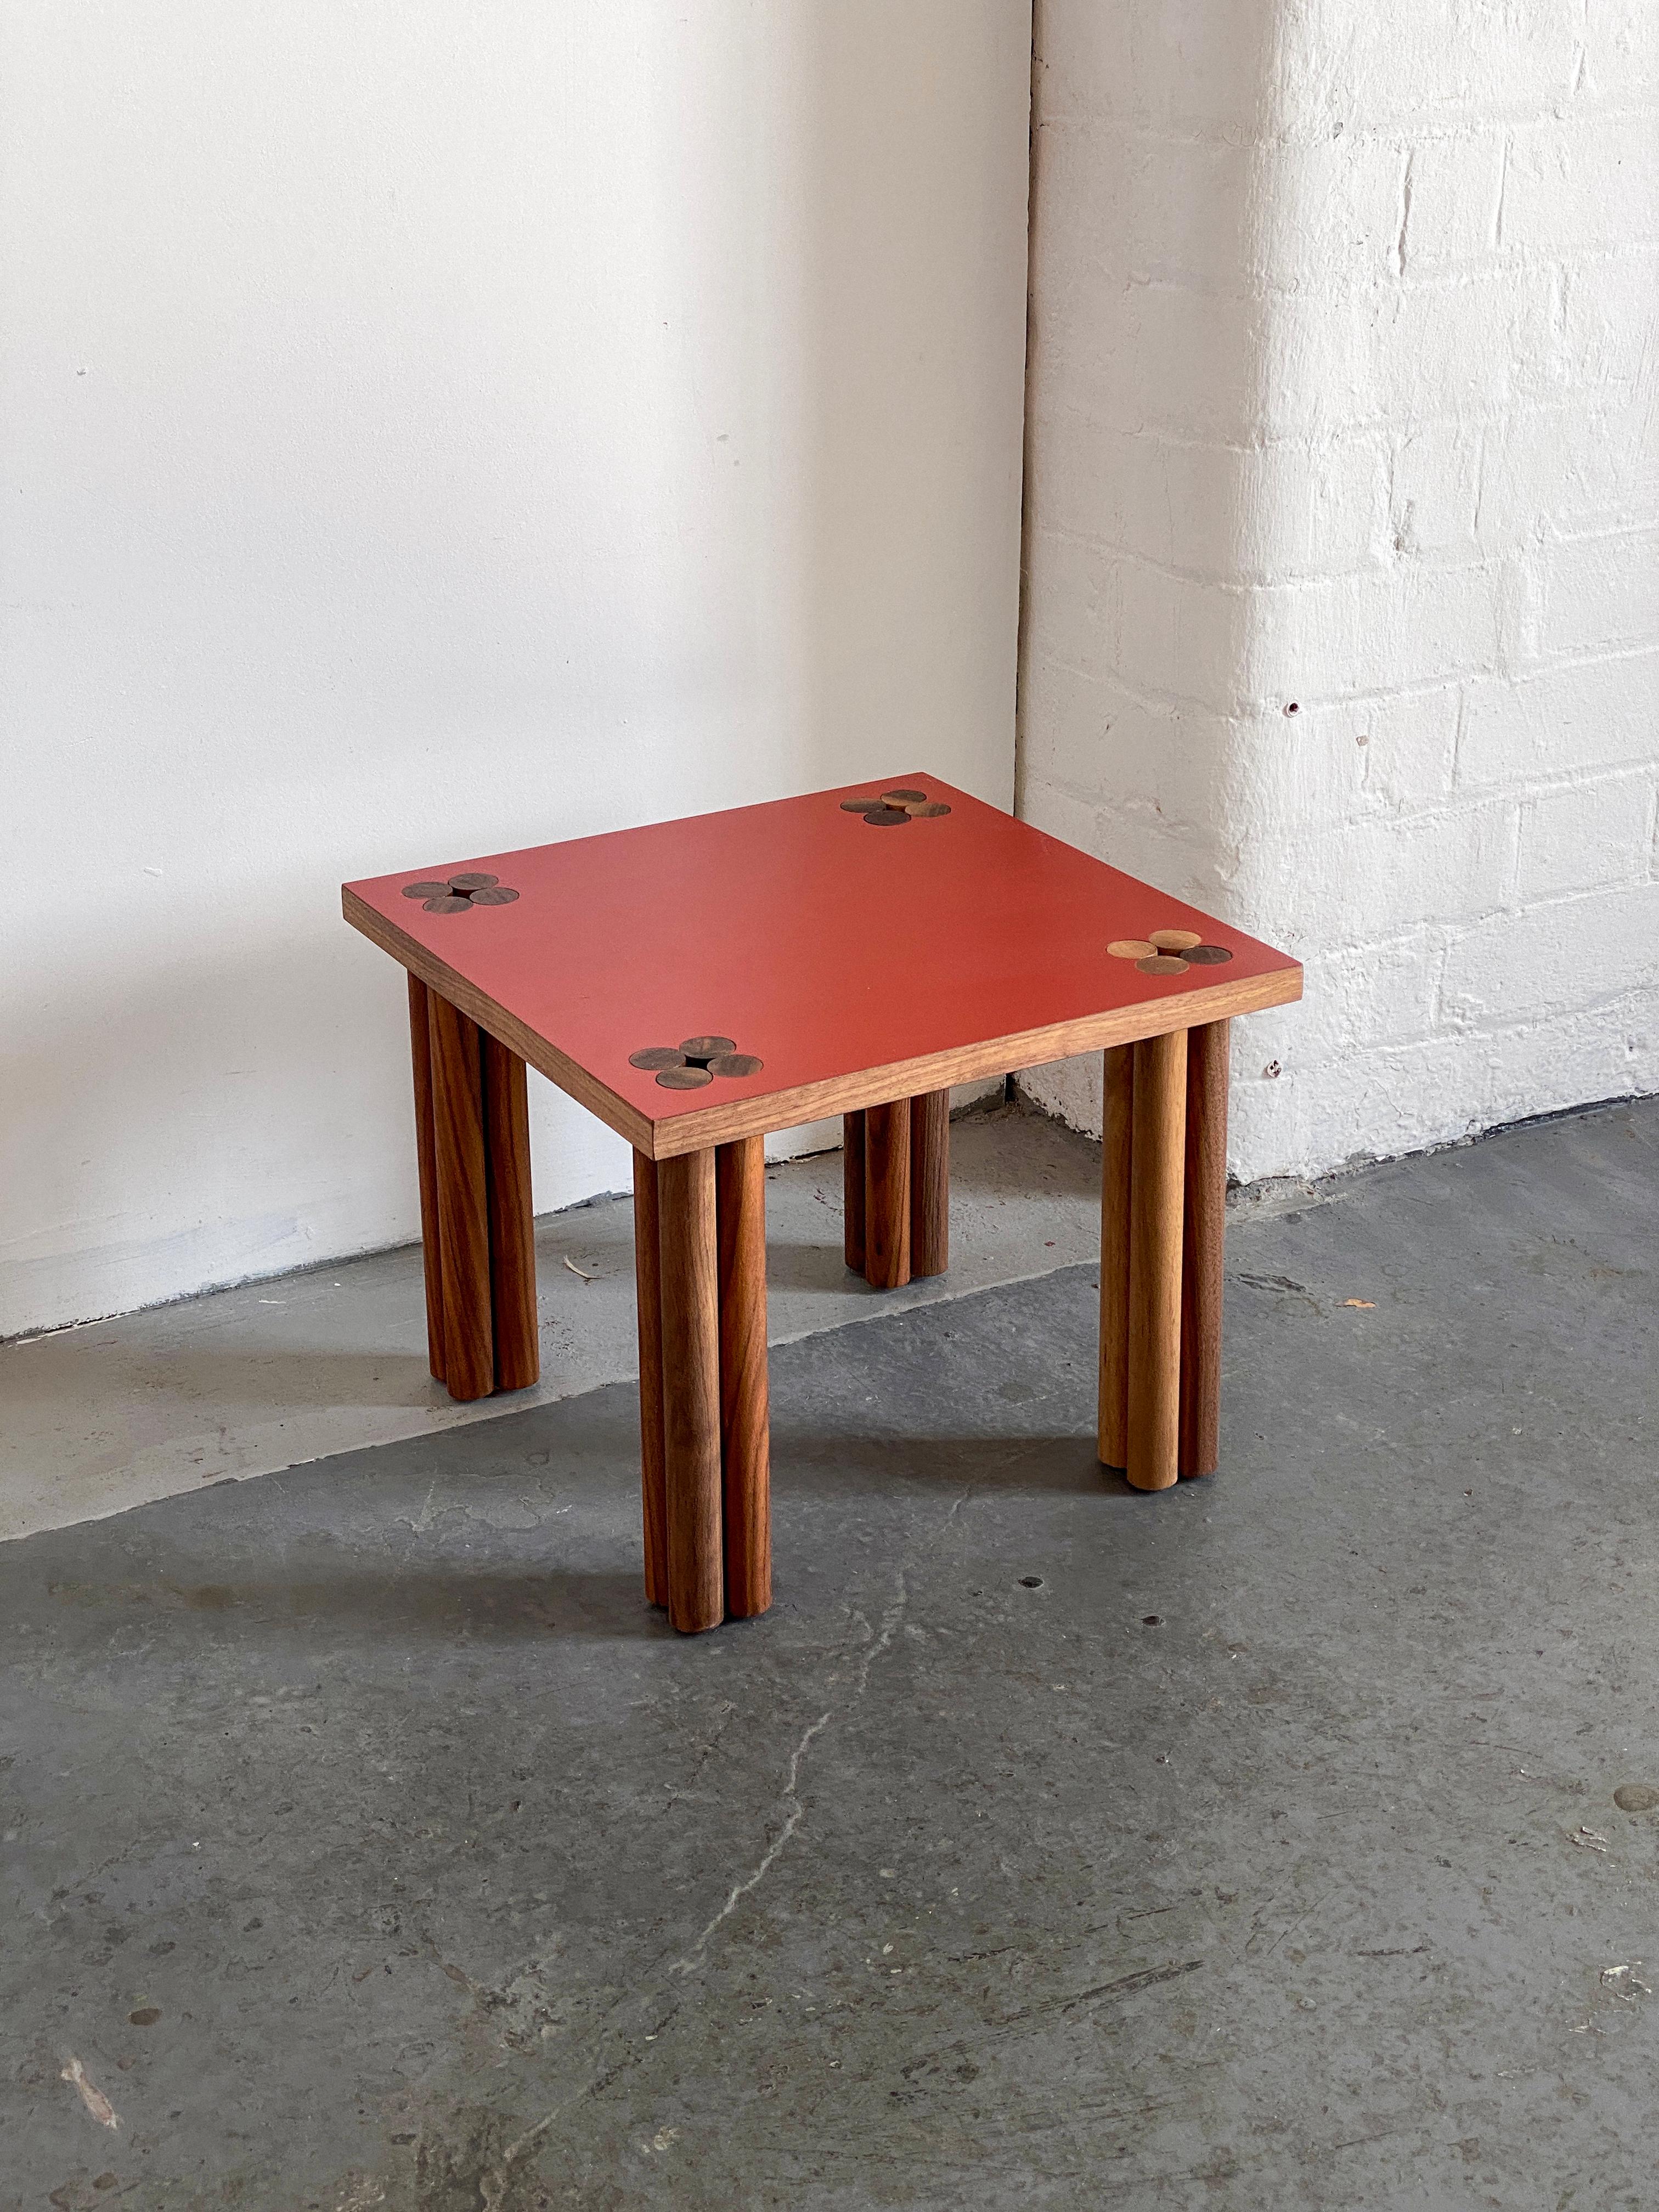 Red Hana side table by Tino Seubert.
Dimensions: D 43 x W 38 x H 50 cm. 
Materials: Solid walnut wood, walnut veneer, Formica.
Oak or other wood possible. 

Tino Seubert
When he first made his now signature wicker and aluminium stools and benches in